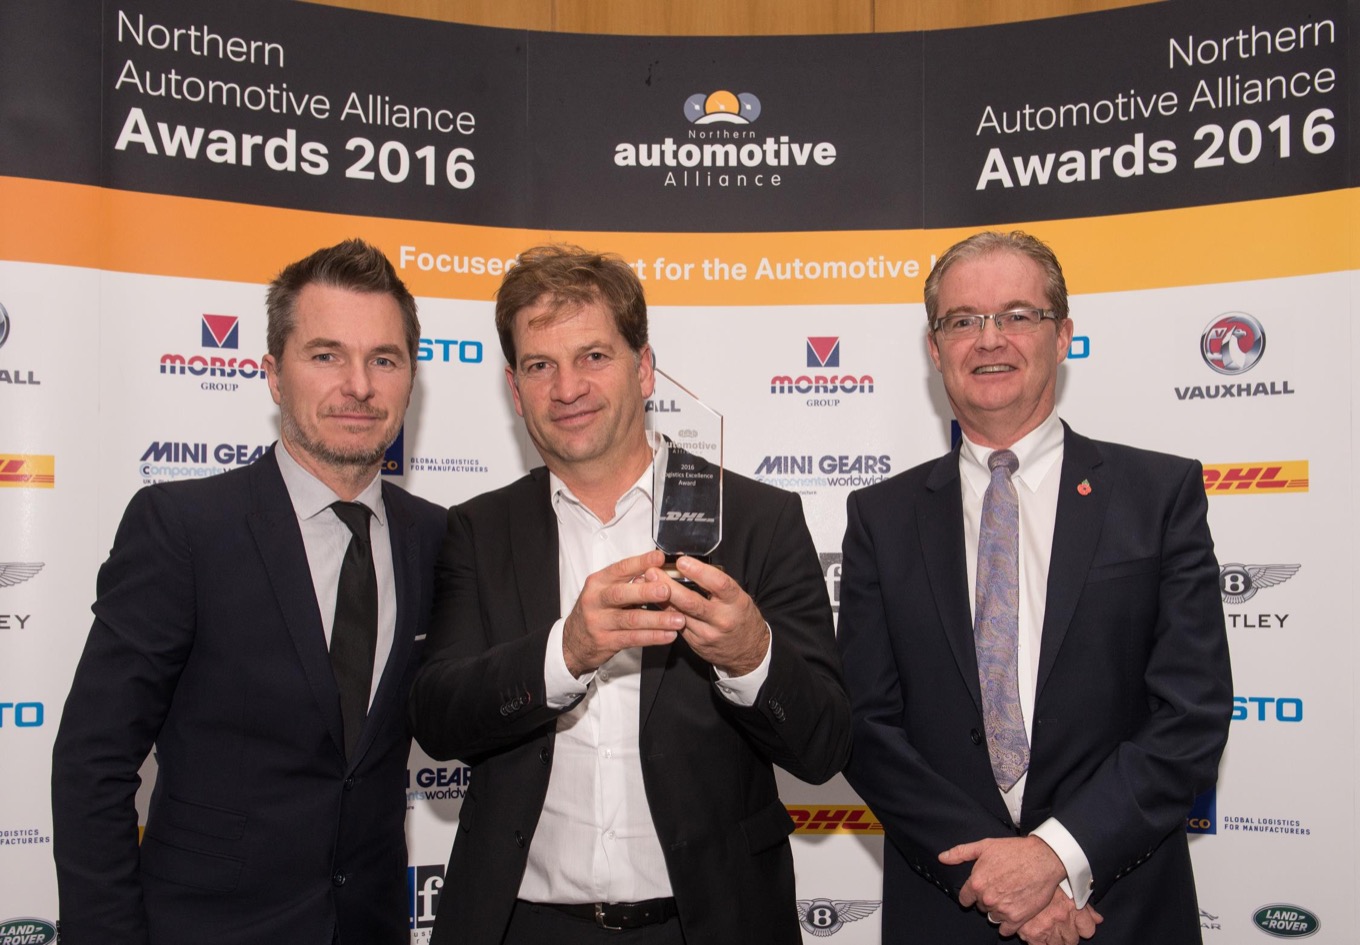 Briggs Automotive Company (BAC) had cause for celebration at the Northern Automotive Alliance (NAA) Awards on 10 November, securing two prestigious awards and seeing off high-profile competition